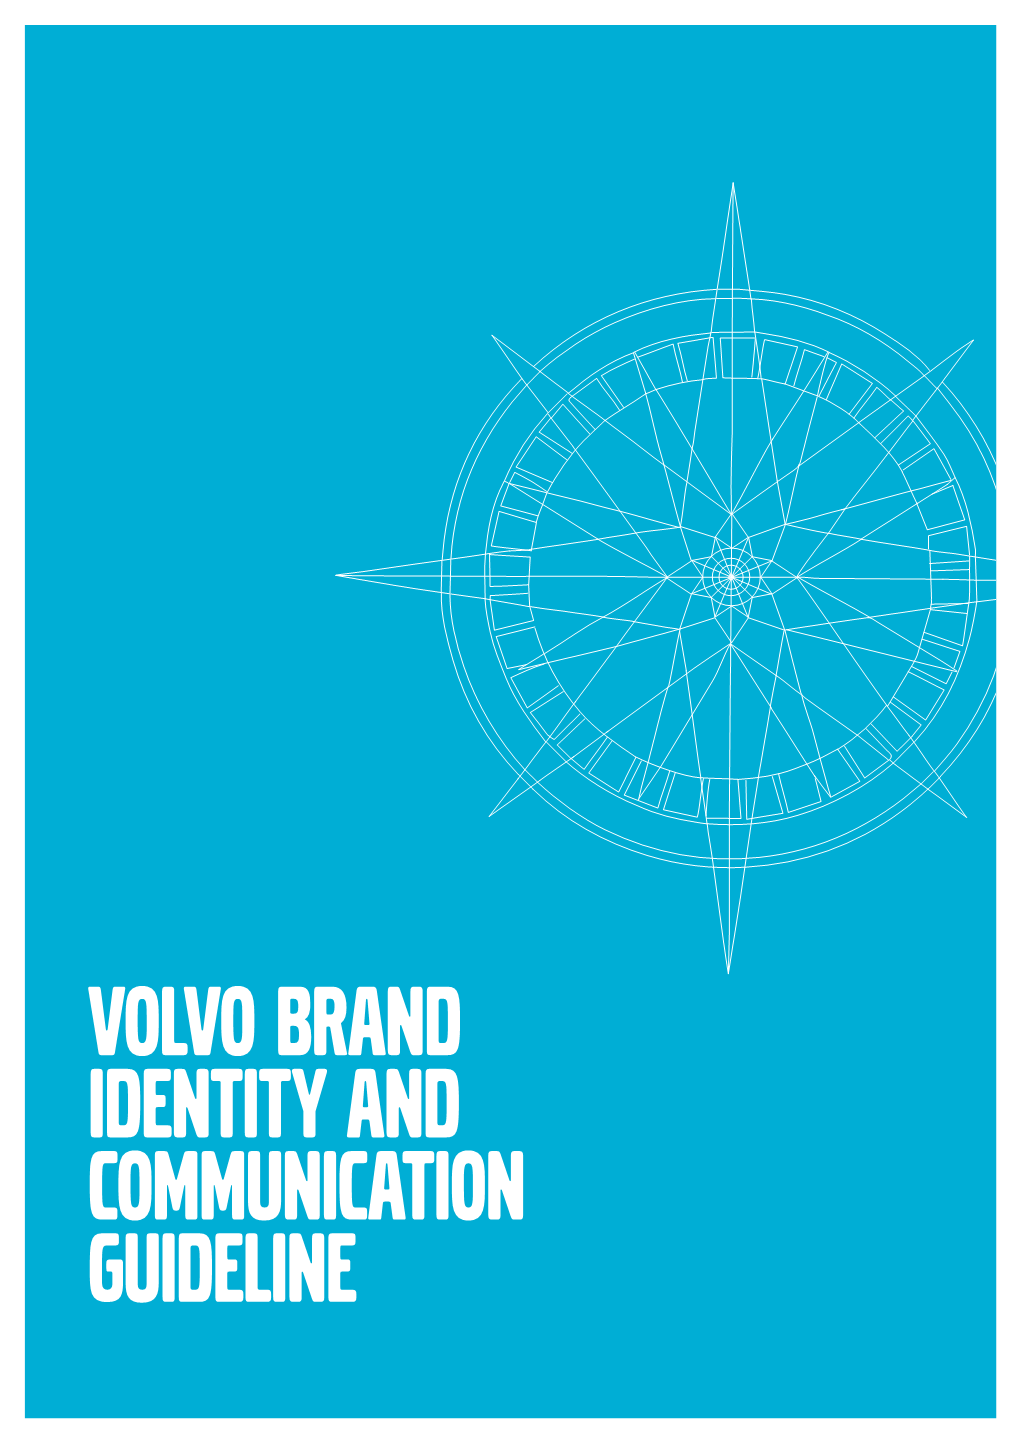 Volvo Brand Identity and Communication Guideline